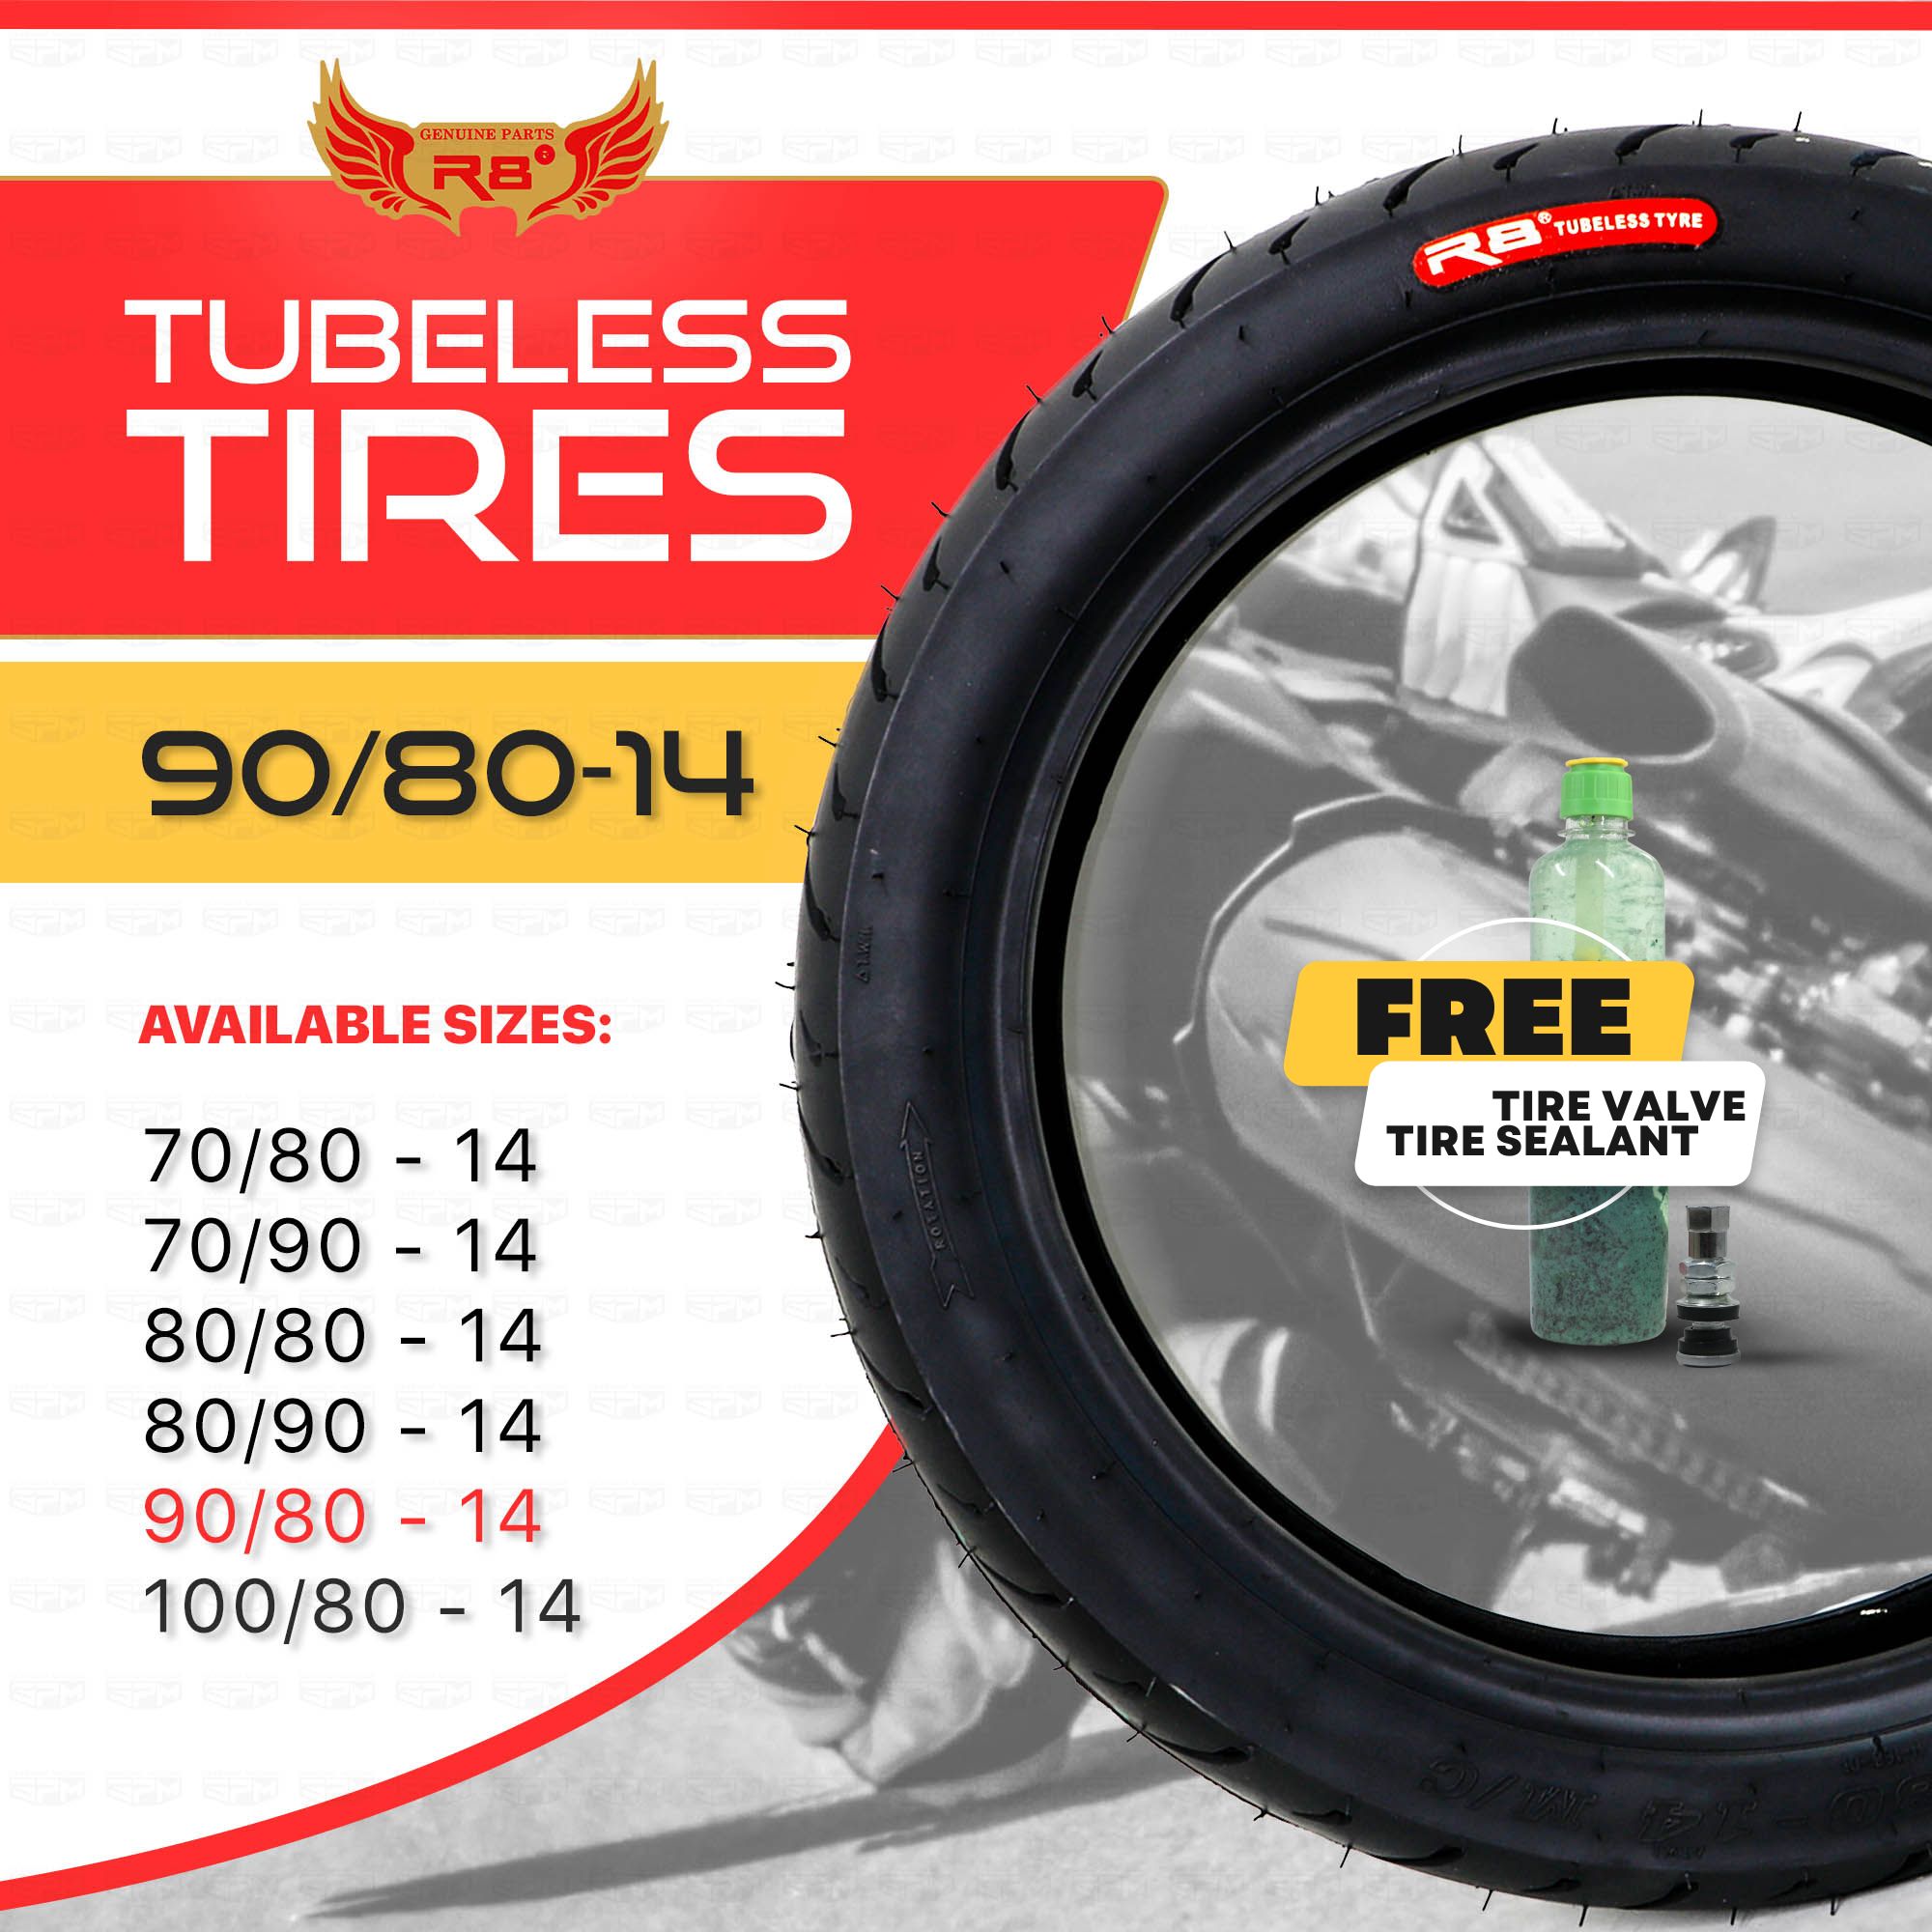 R8 TUBELESS TIRE 100/80X14 (9861-209) WITH SEALANT AND PITO